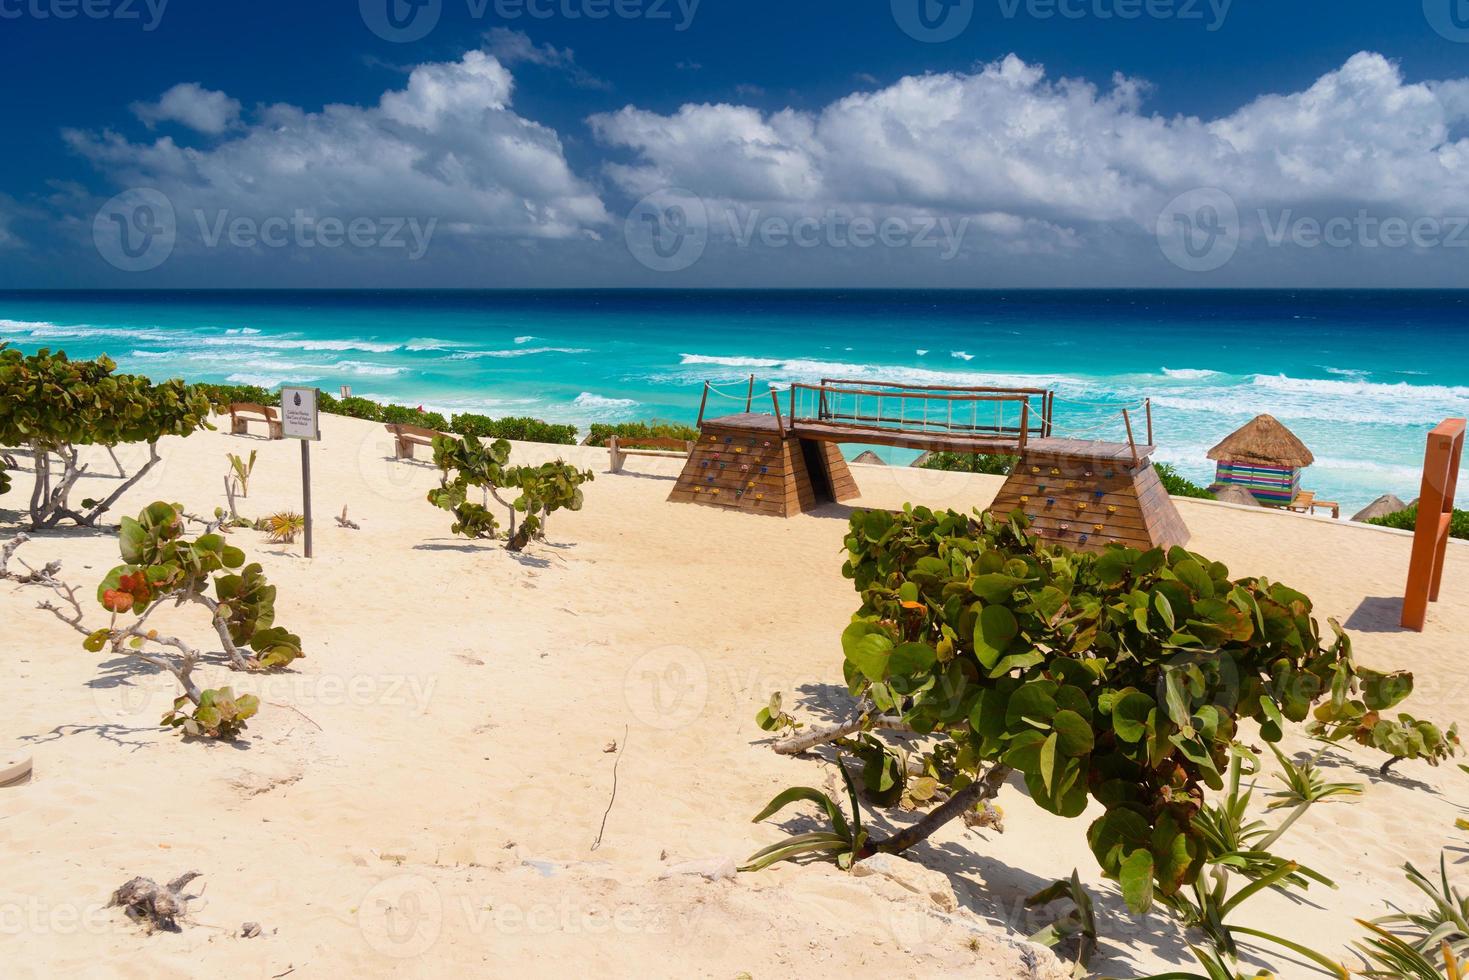 Sandy beach with azure water on a sunny day near Cancun, Mexico photo